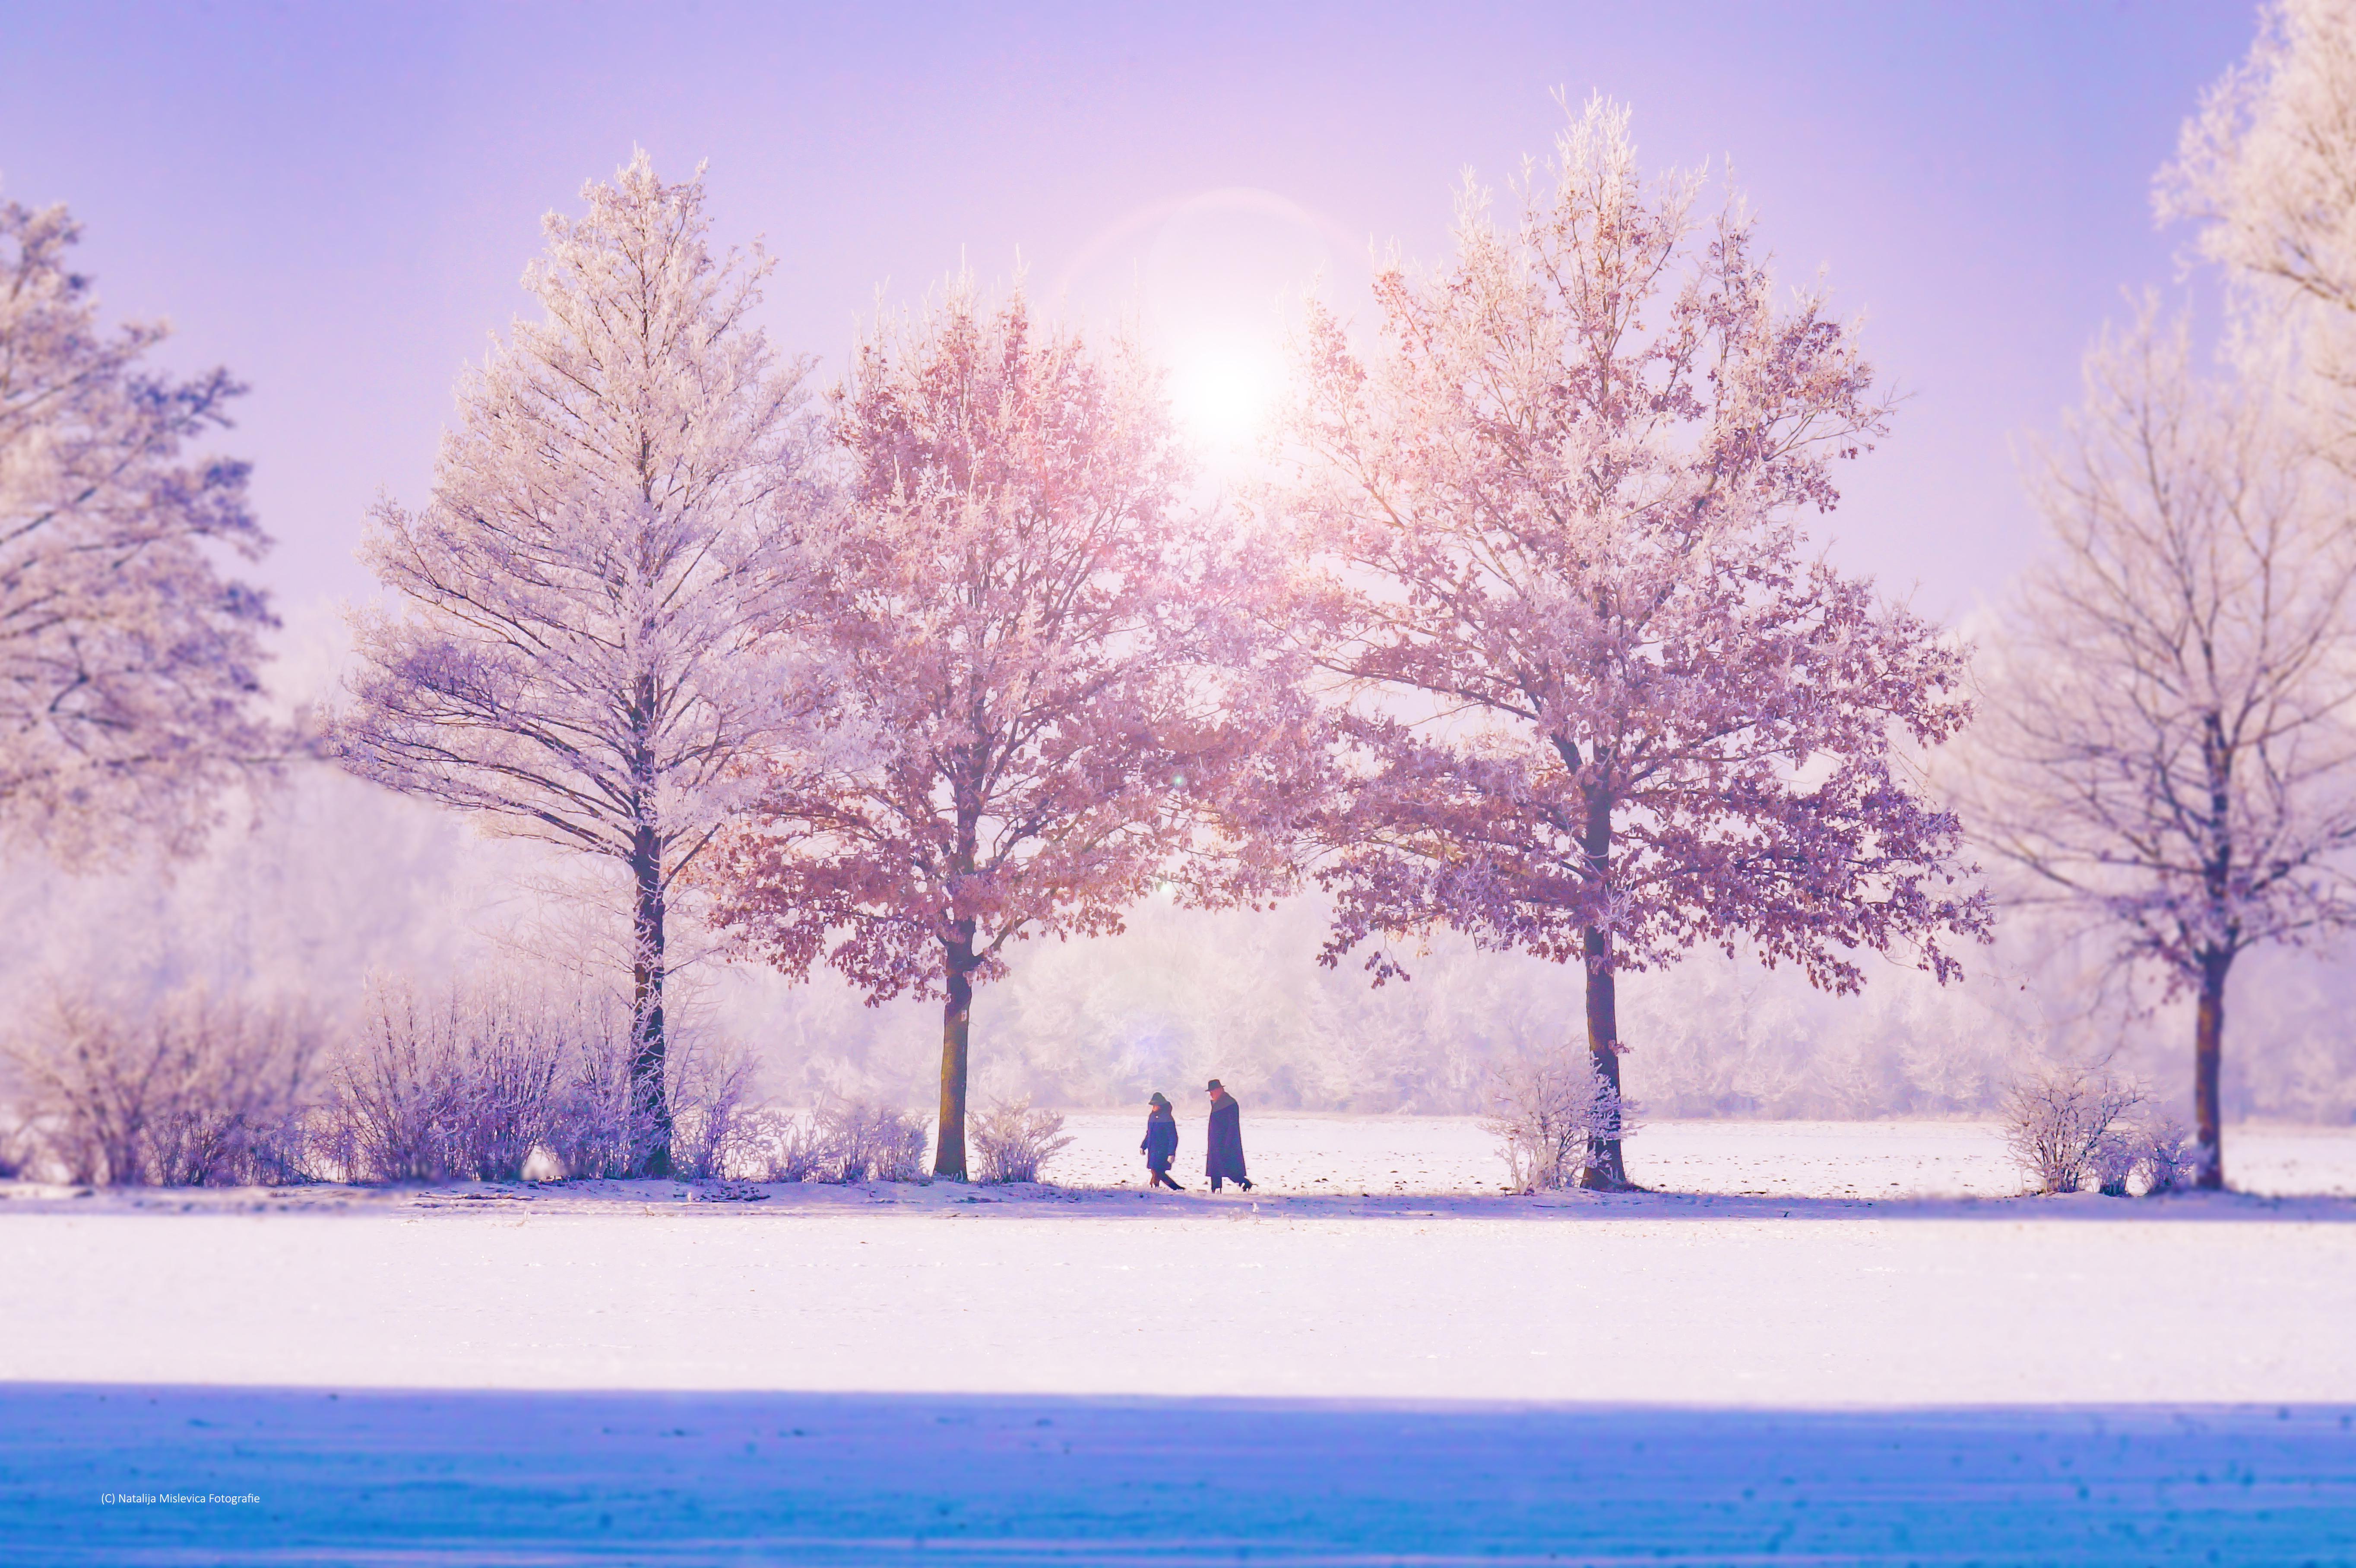 Winter Wallpaper: 30 Awesome Image For The Cold Season